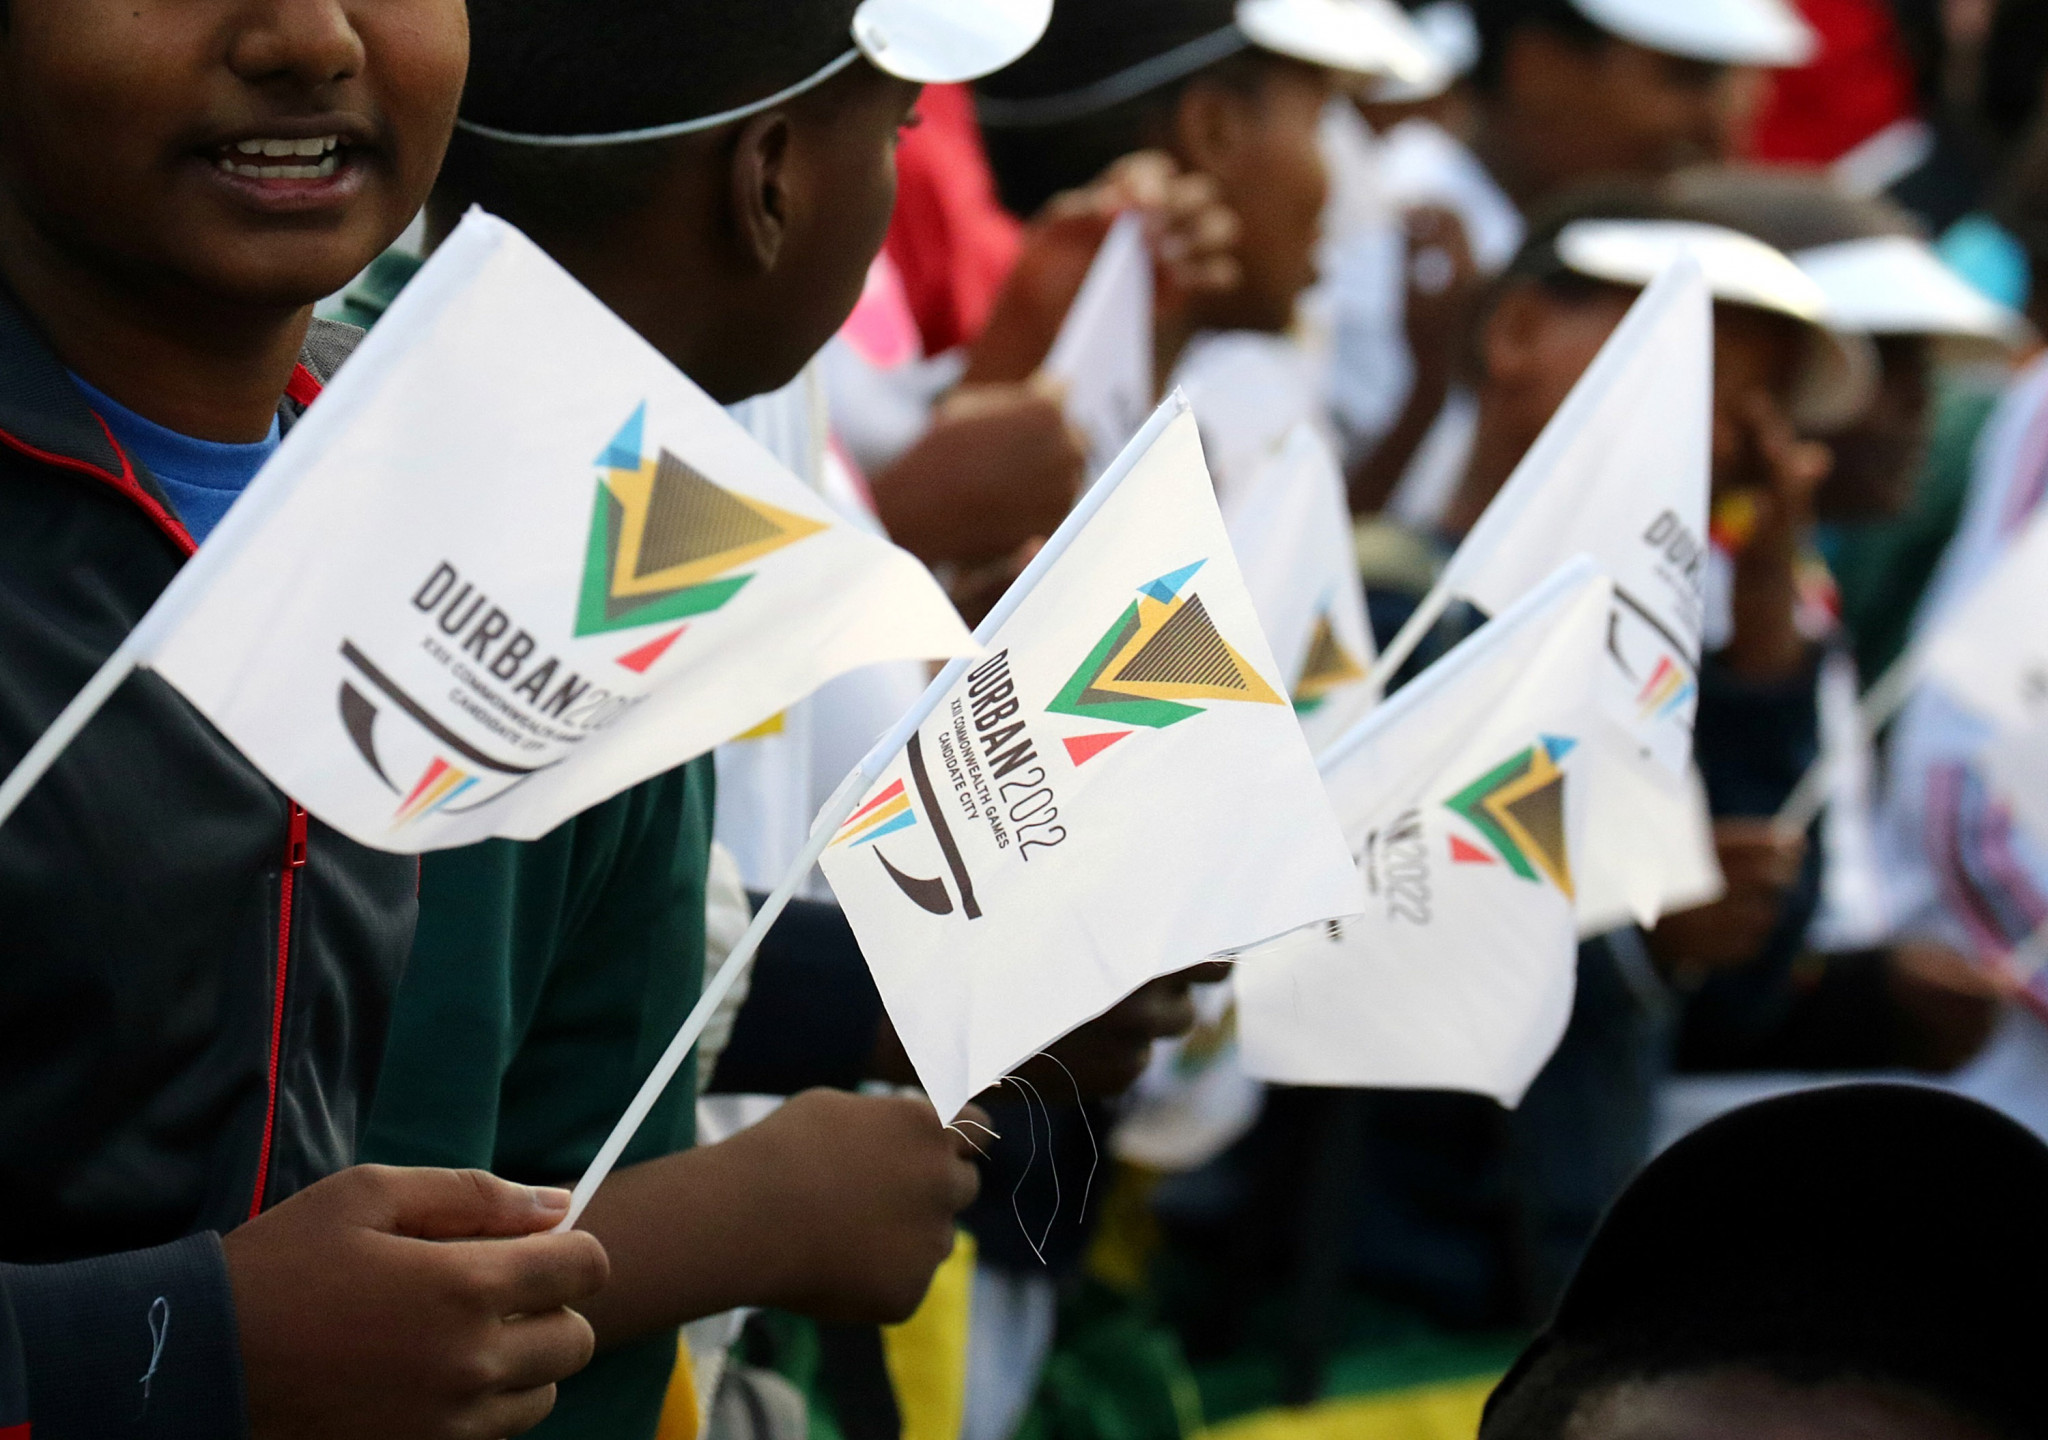 Durban was stripped of the 2022 Commonwealth Games because of the lack of financial guarantees ©Getty Images